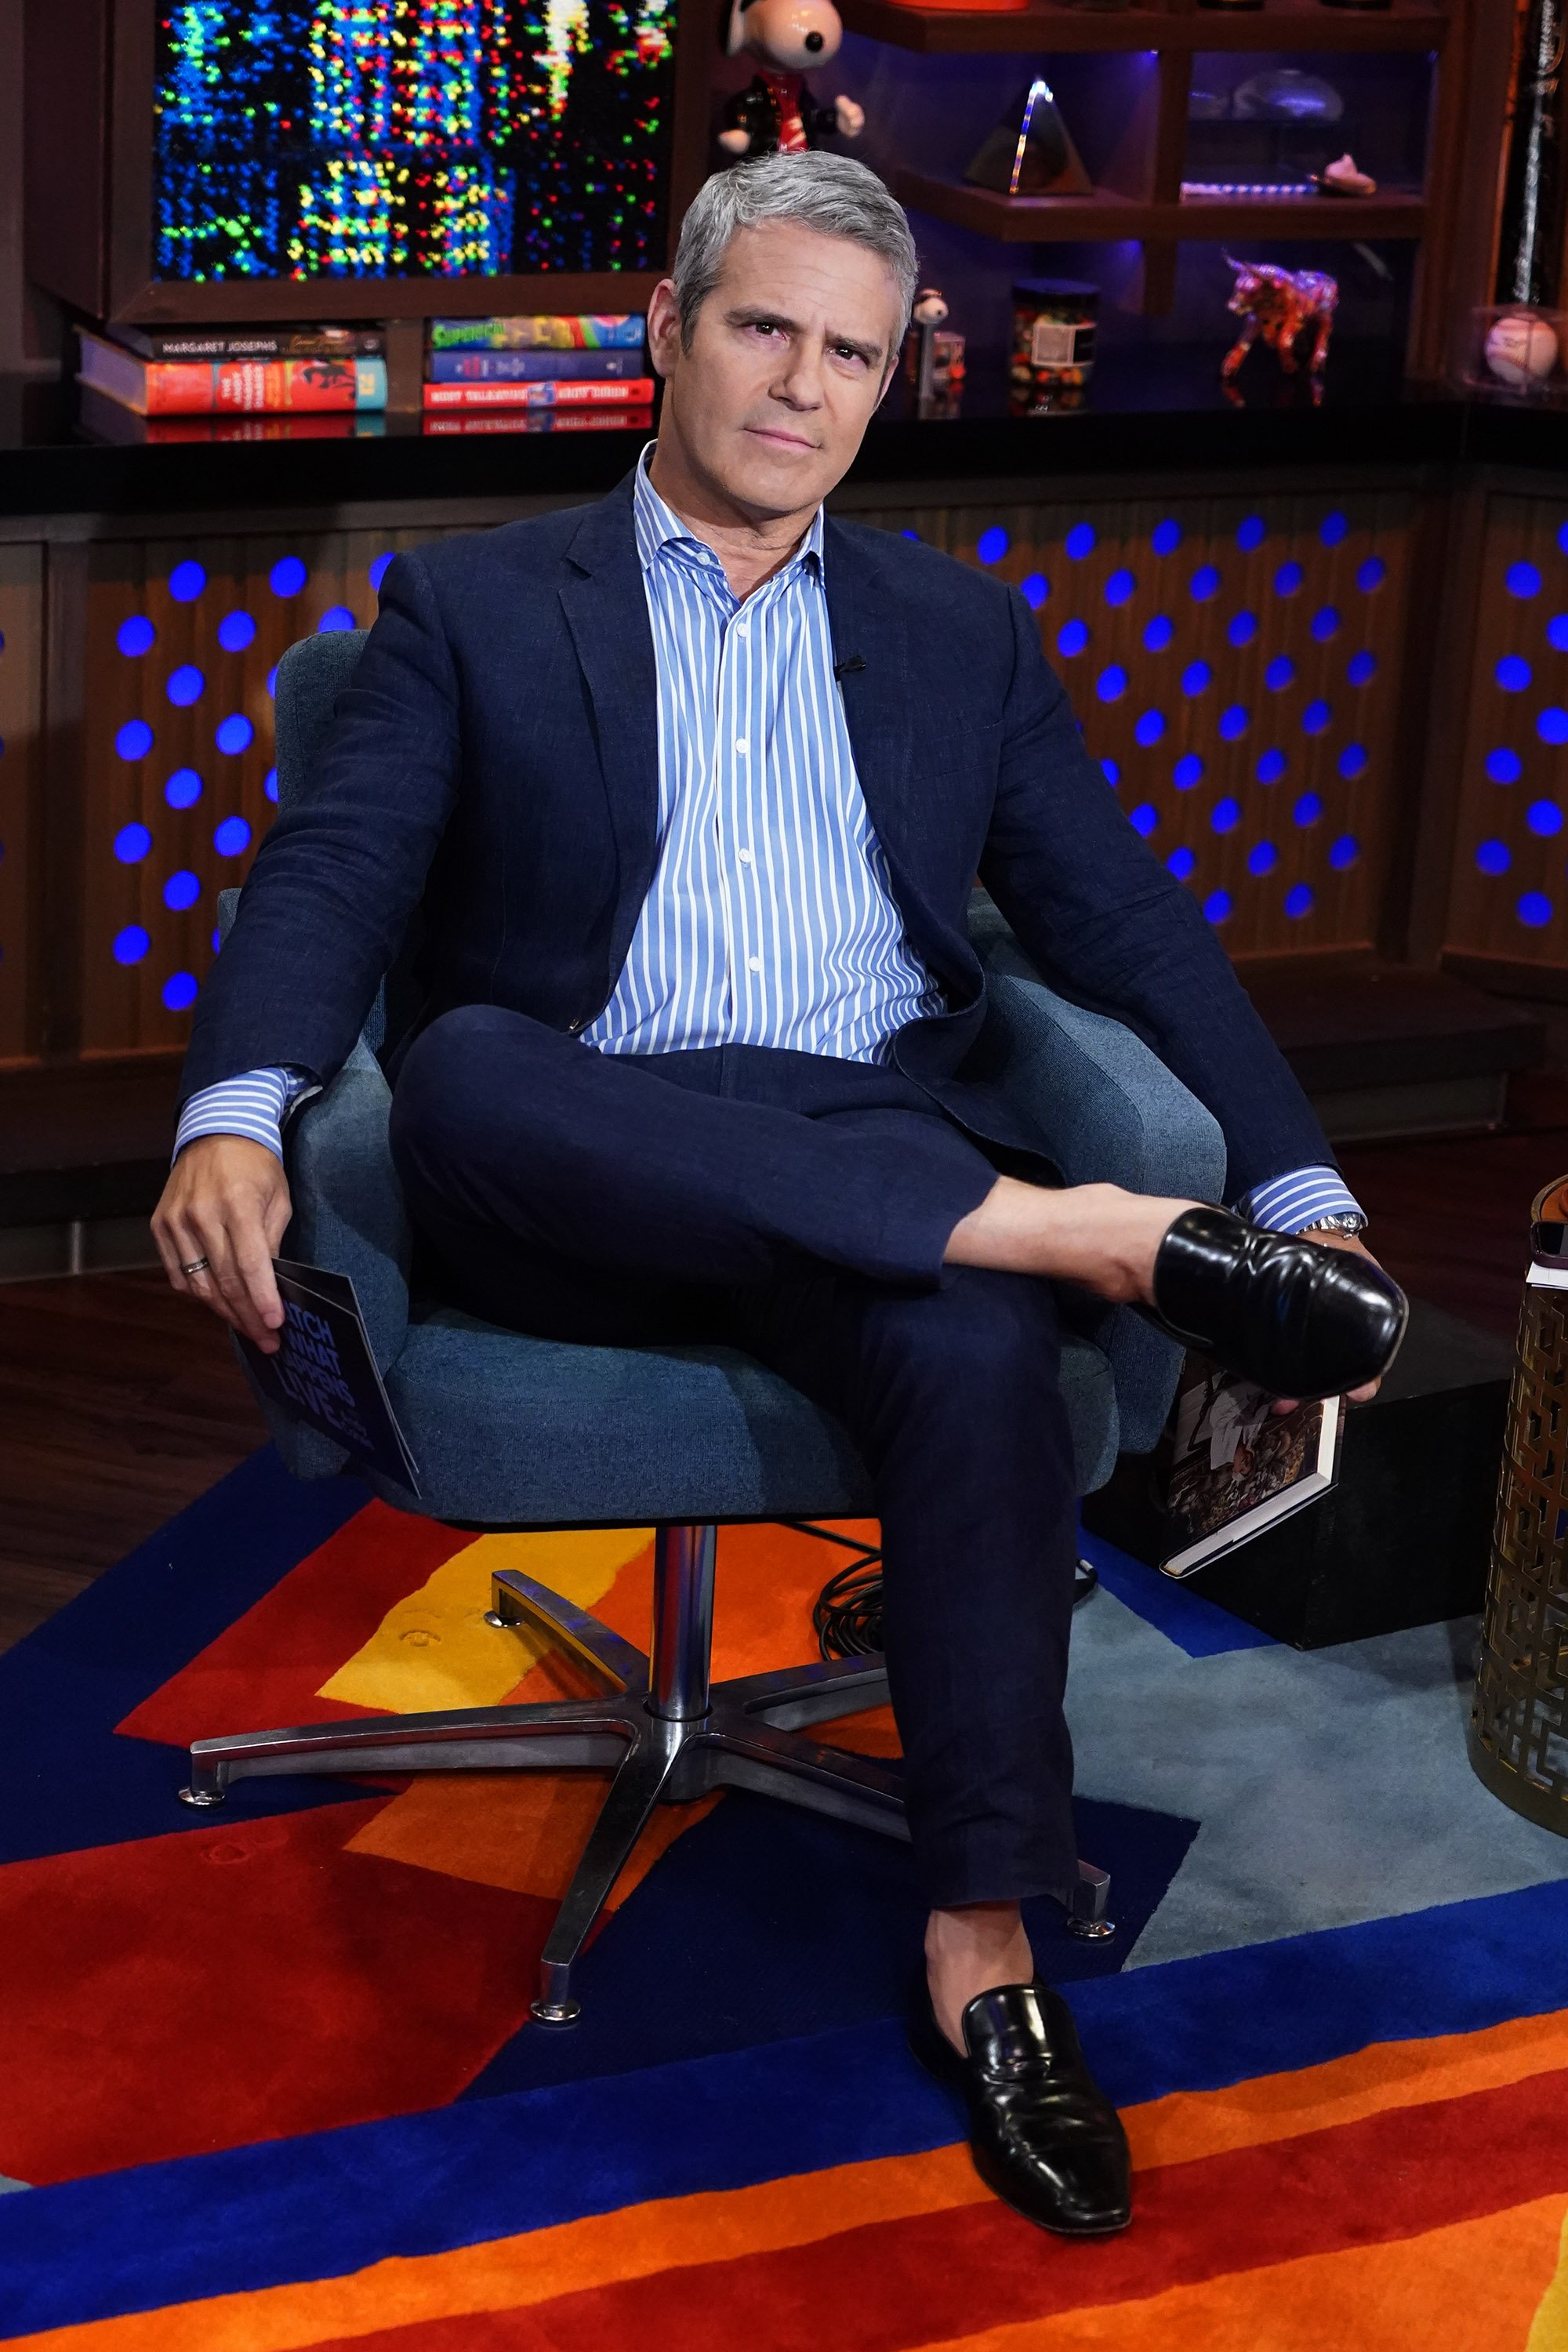 Andy Cohen on "Watch What Happens Live With Andy Cohen" Episode 18 137. August 10, 2021 | Source: Getty Images 